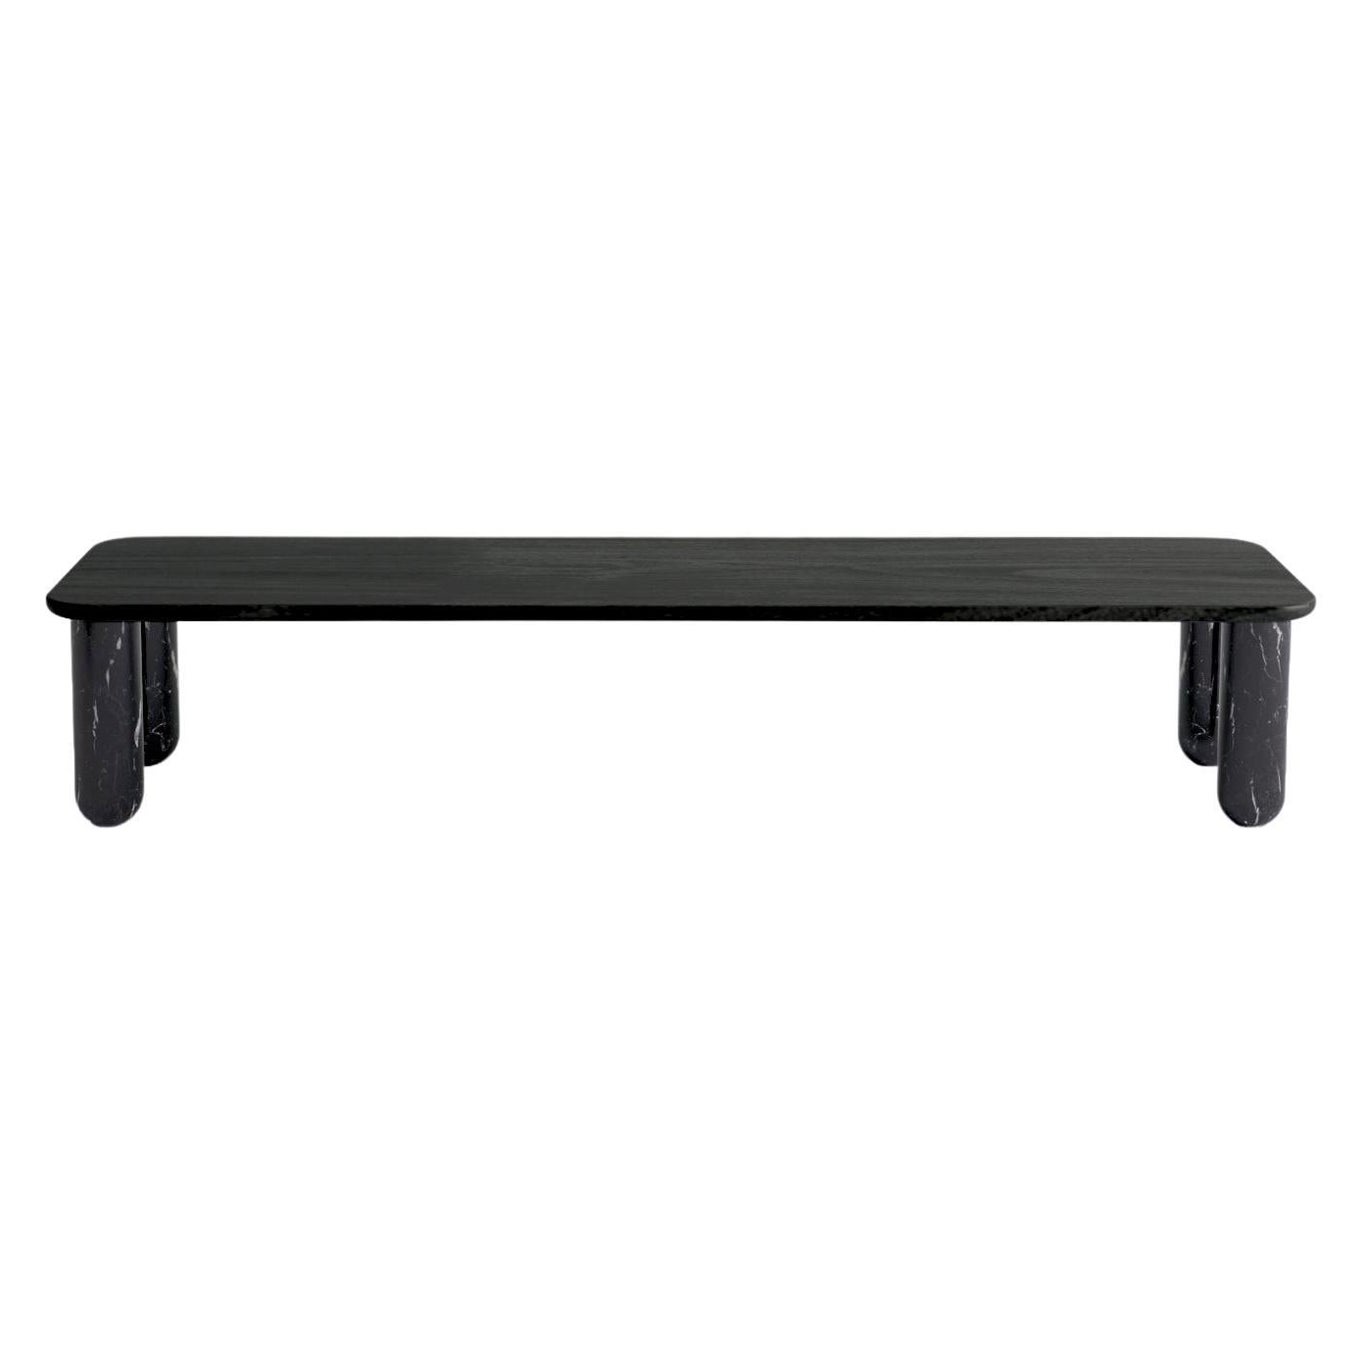 Large Black Wood and Black Marble "Sunday" Coffee Table, Jean-Baptiste Souletie